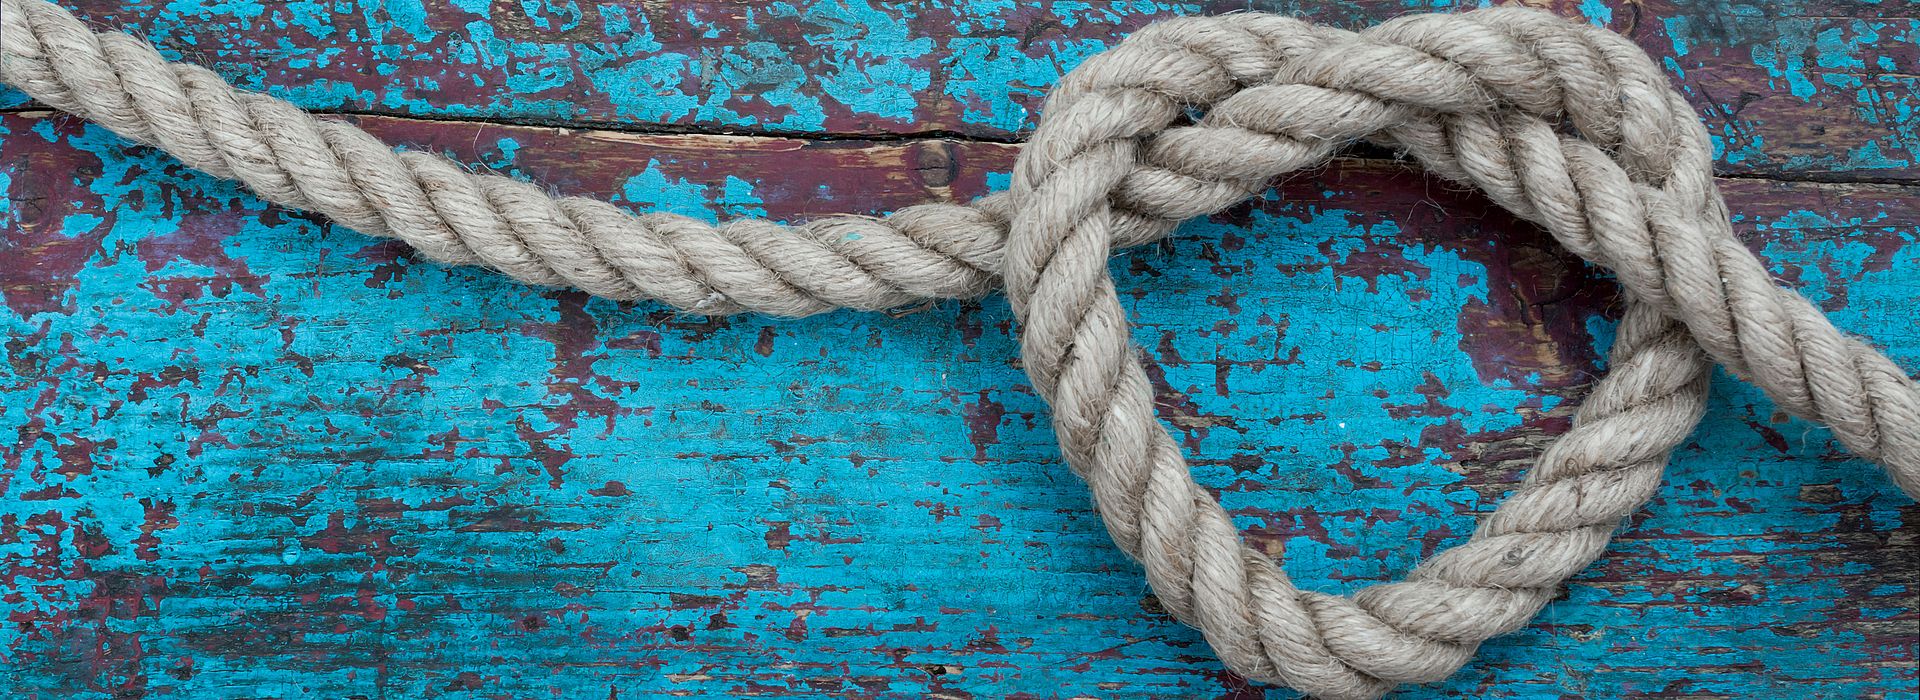 rope on turquoise painted wood